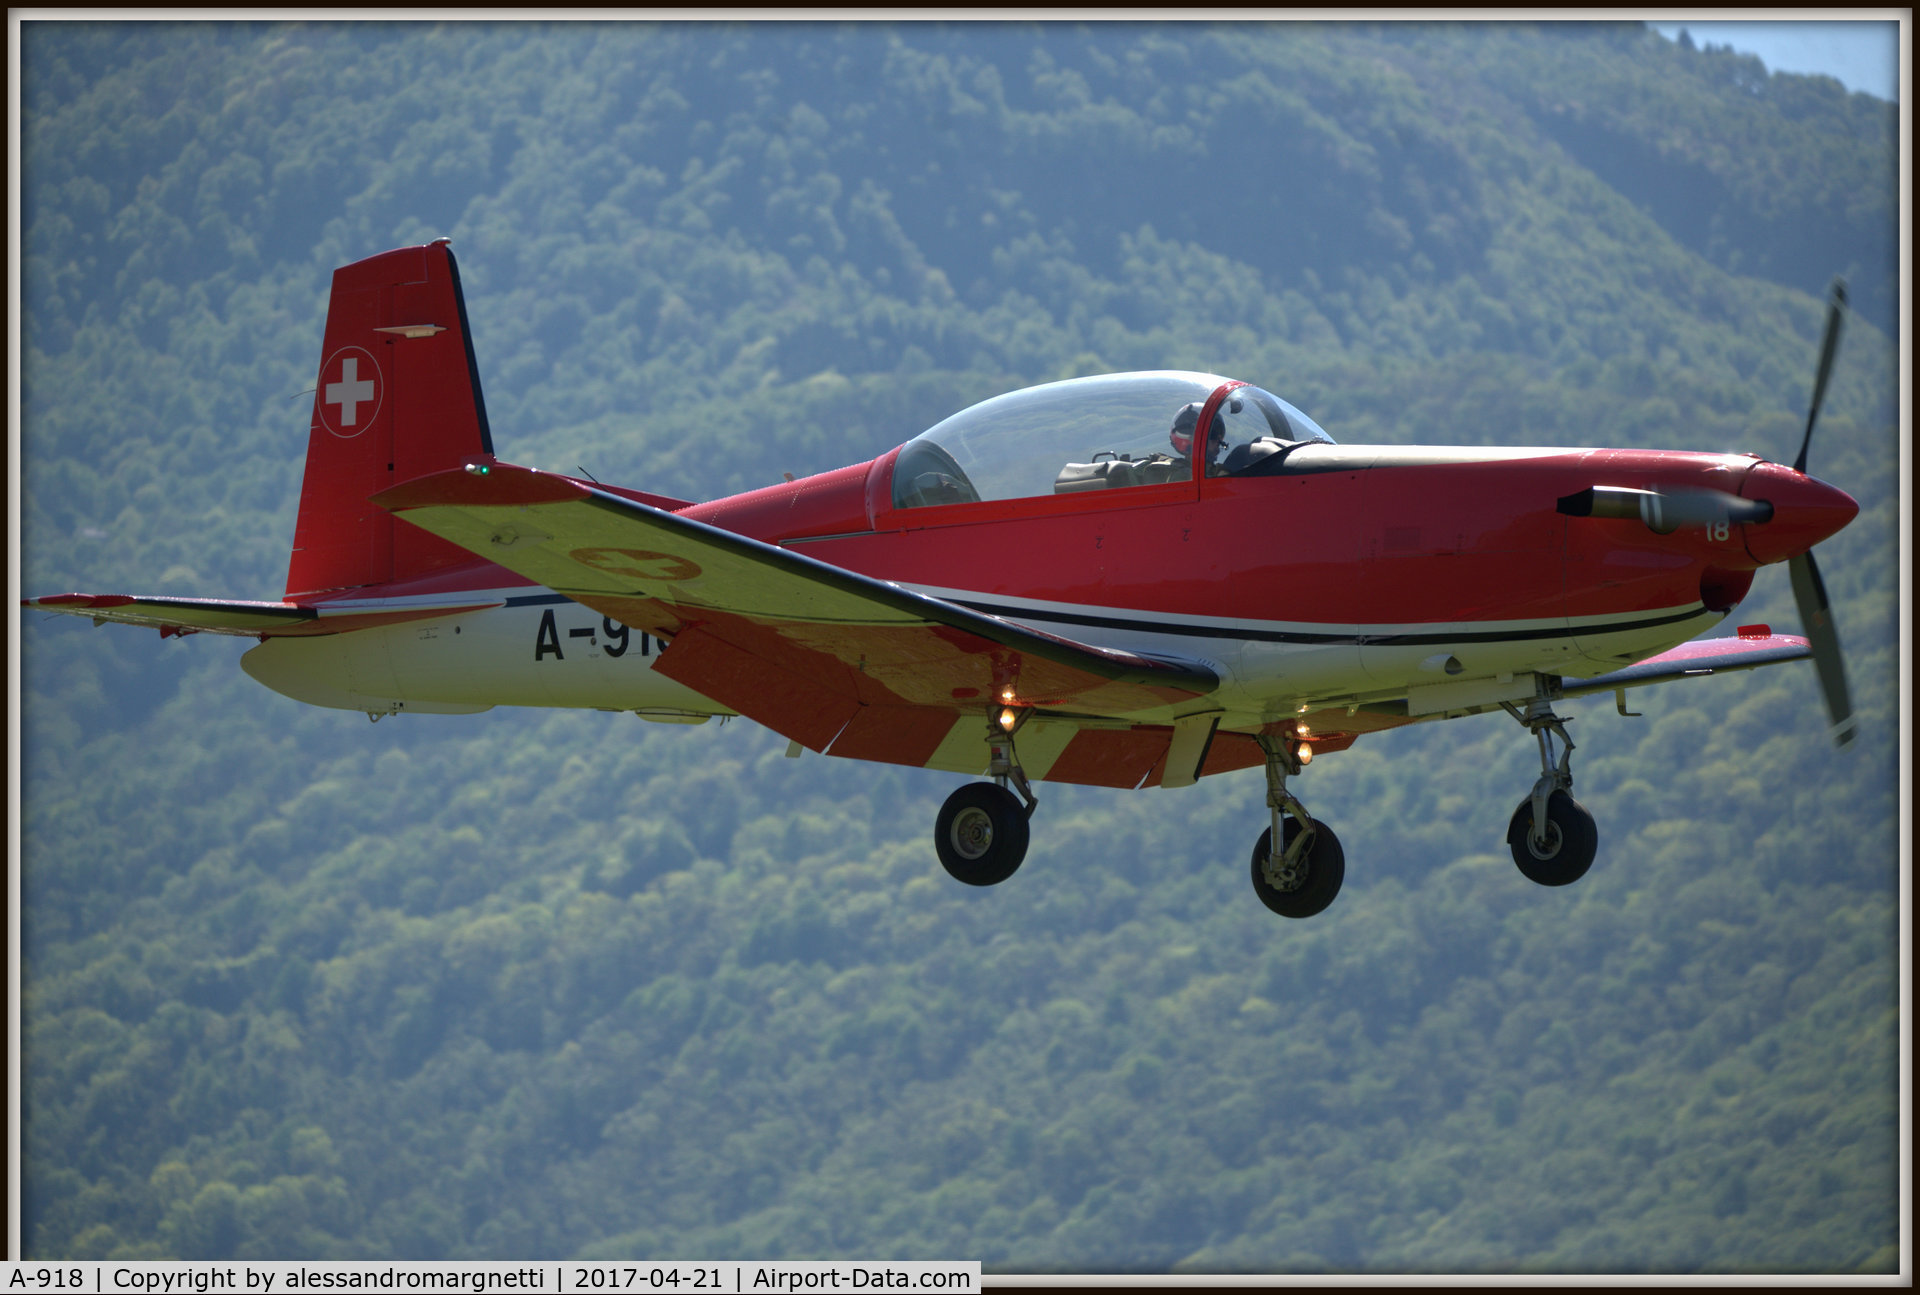 A-918, 1983 Pilatus PC-7 Turbo Trainer C/N 326, Landing in Locarno Magadino After show training of PC-7 Team